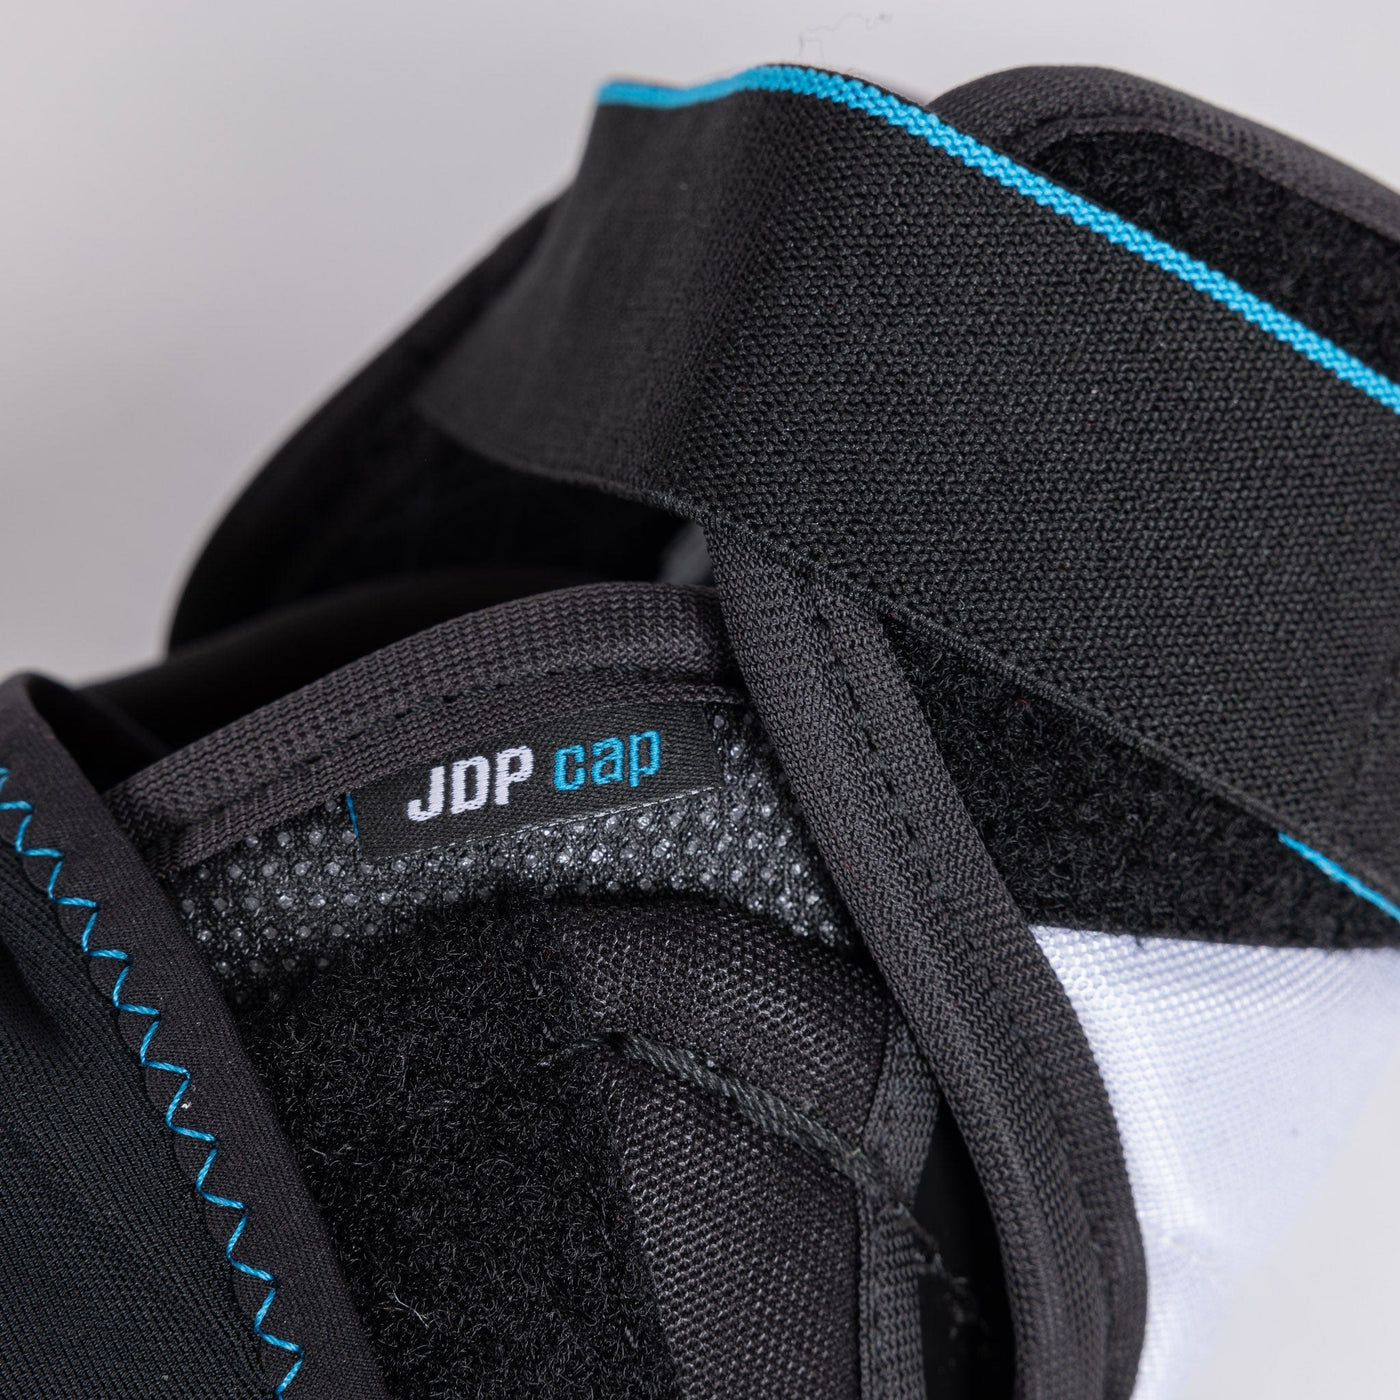 CCM Jetspeed Control Senior Hockey Elbow Pads - The Hockey Shop Source For Sports